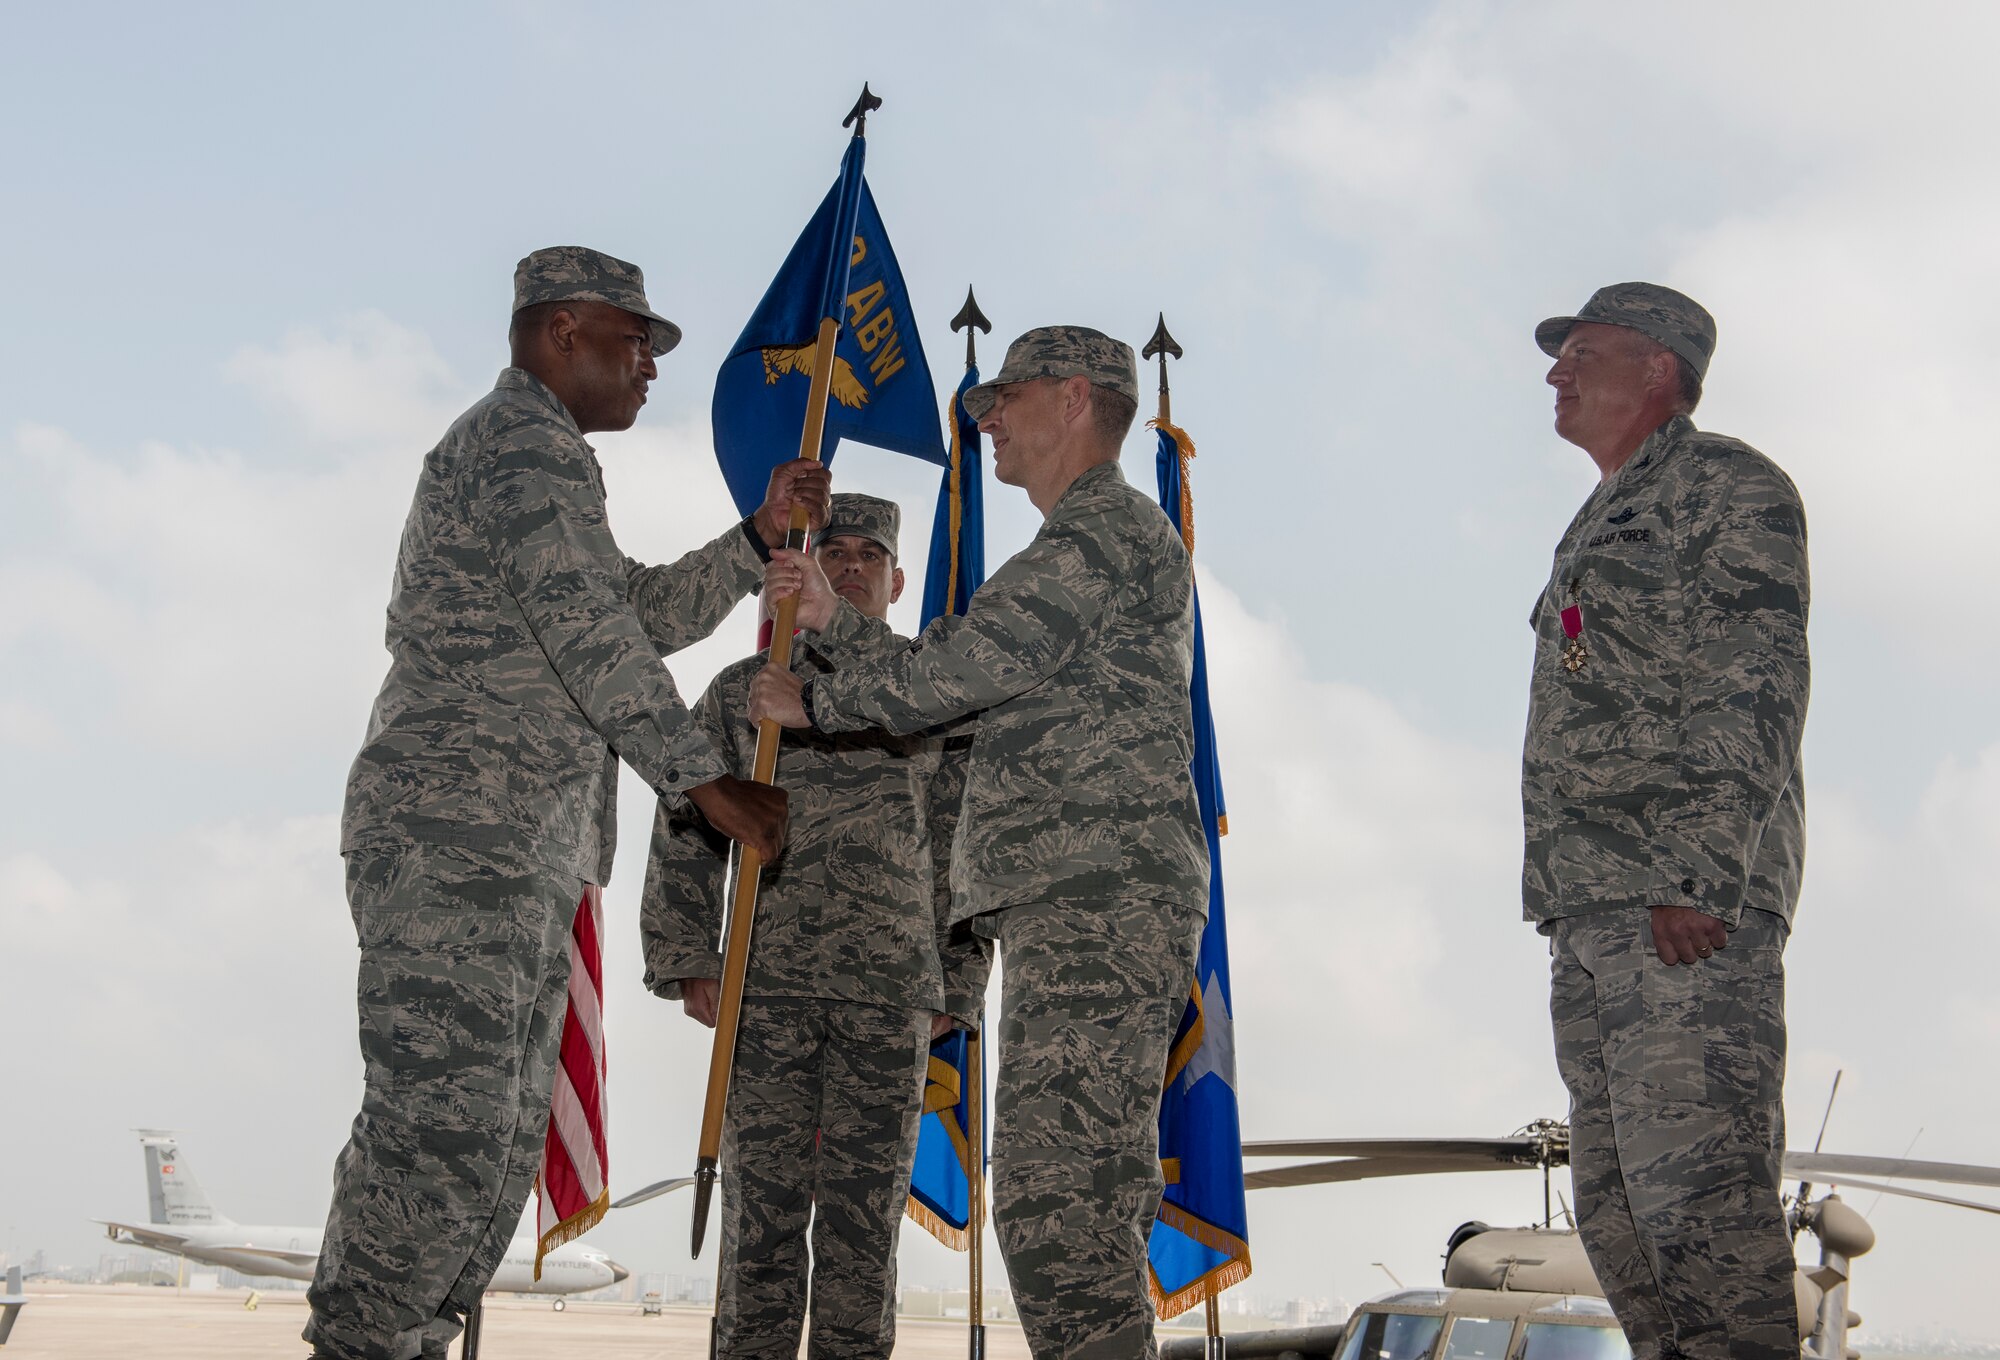 U.S. Air Force Lt. Gen. Richard M. Clark, 3rd Air Force commander, passes a guide-on to Col. Britt Hurst during a change of command ceremony at Incirlik Air Base, Turkey, July 10, 2018.